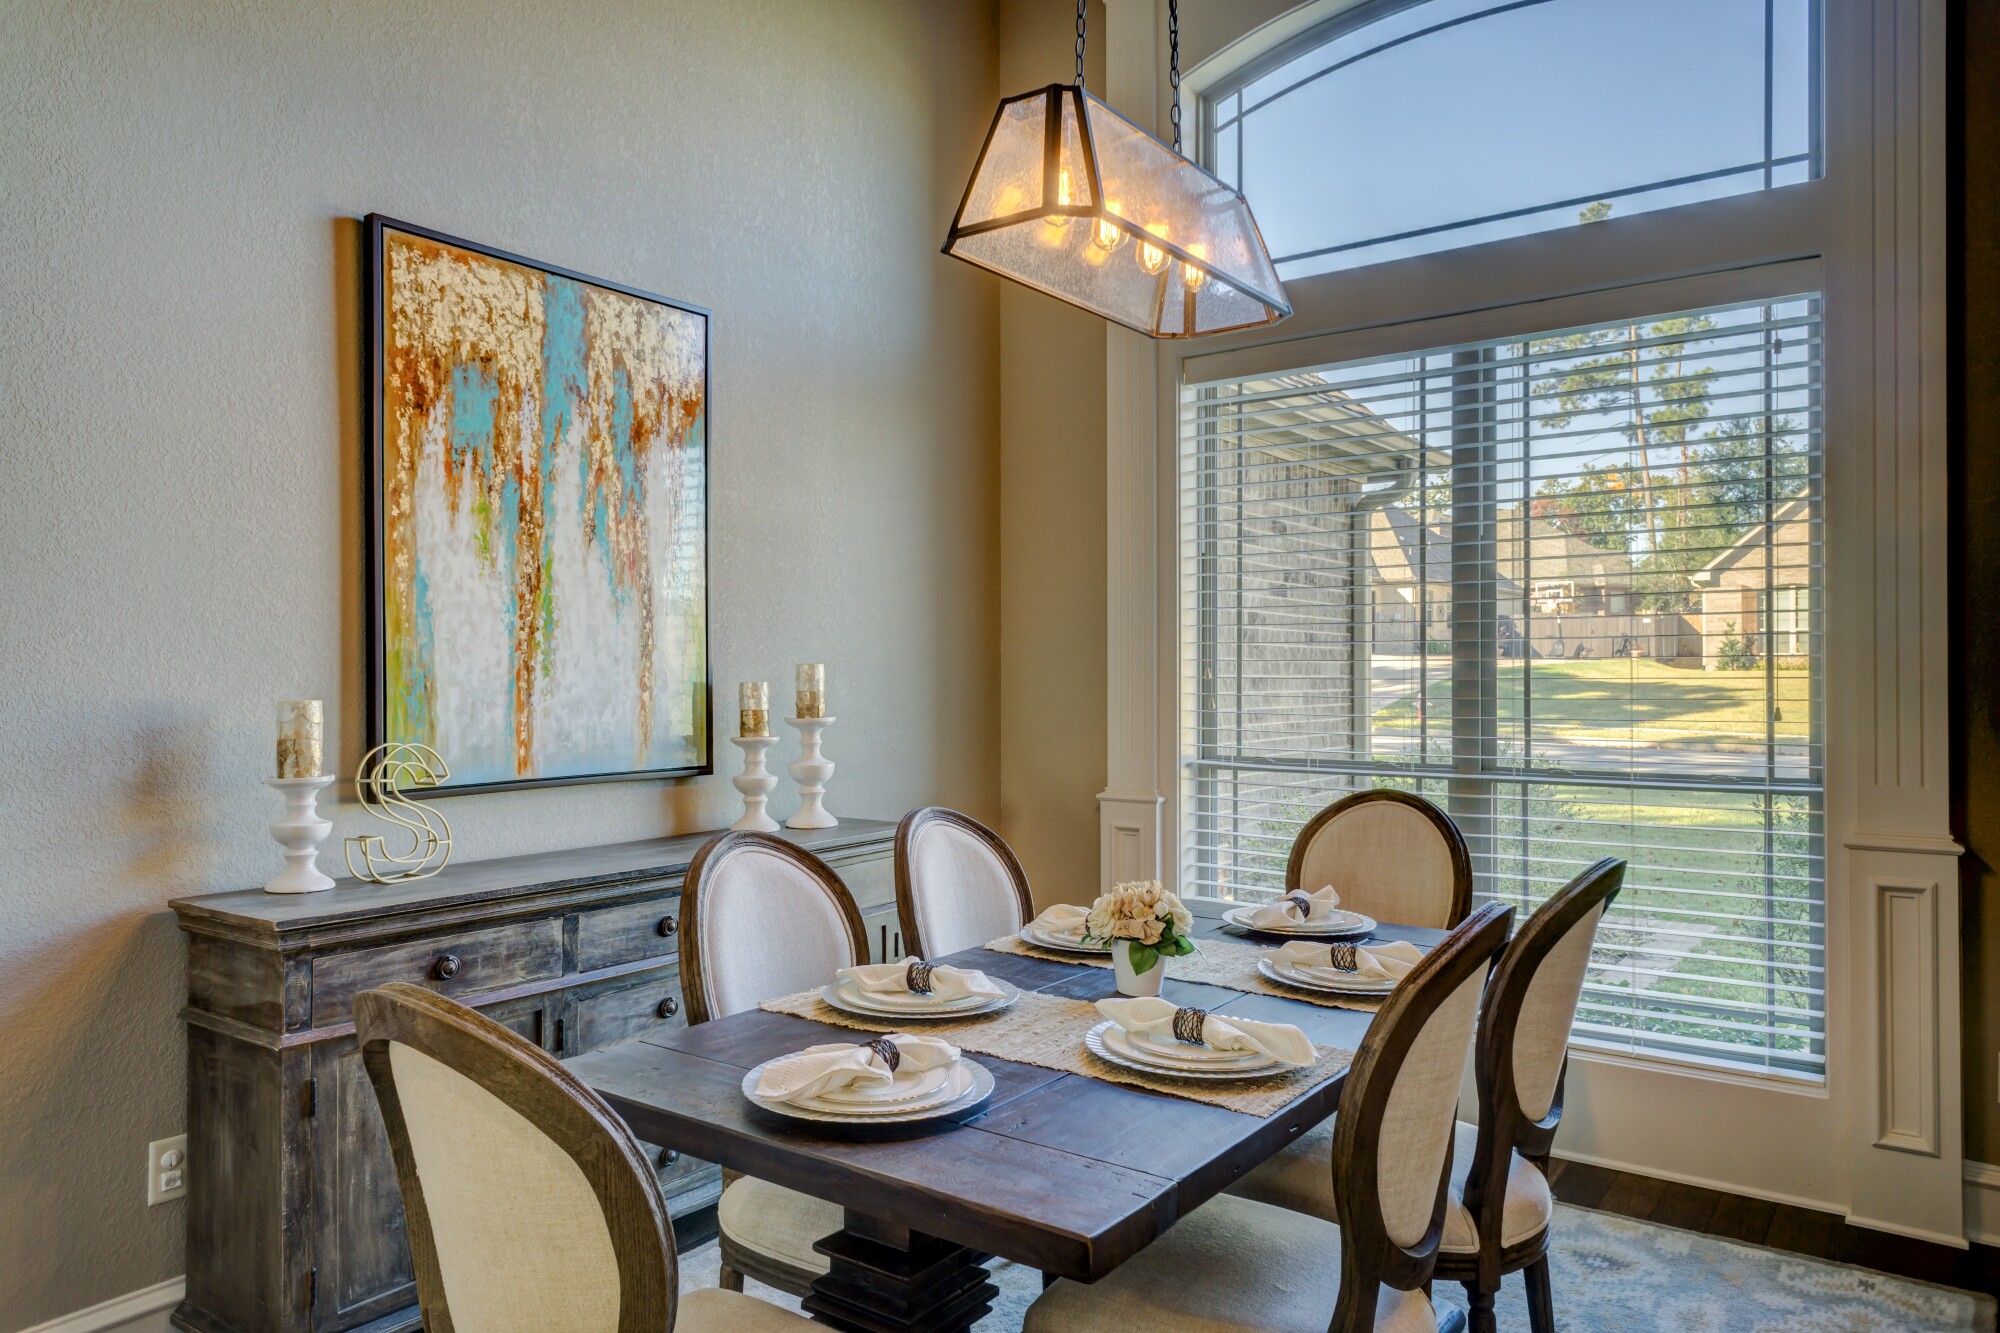 Your dinning room table is more than just a place to eat. It's a decorative centerpiece. Here are a few tips to help you choose the right one for your home.